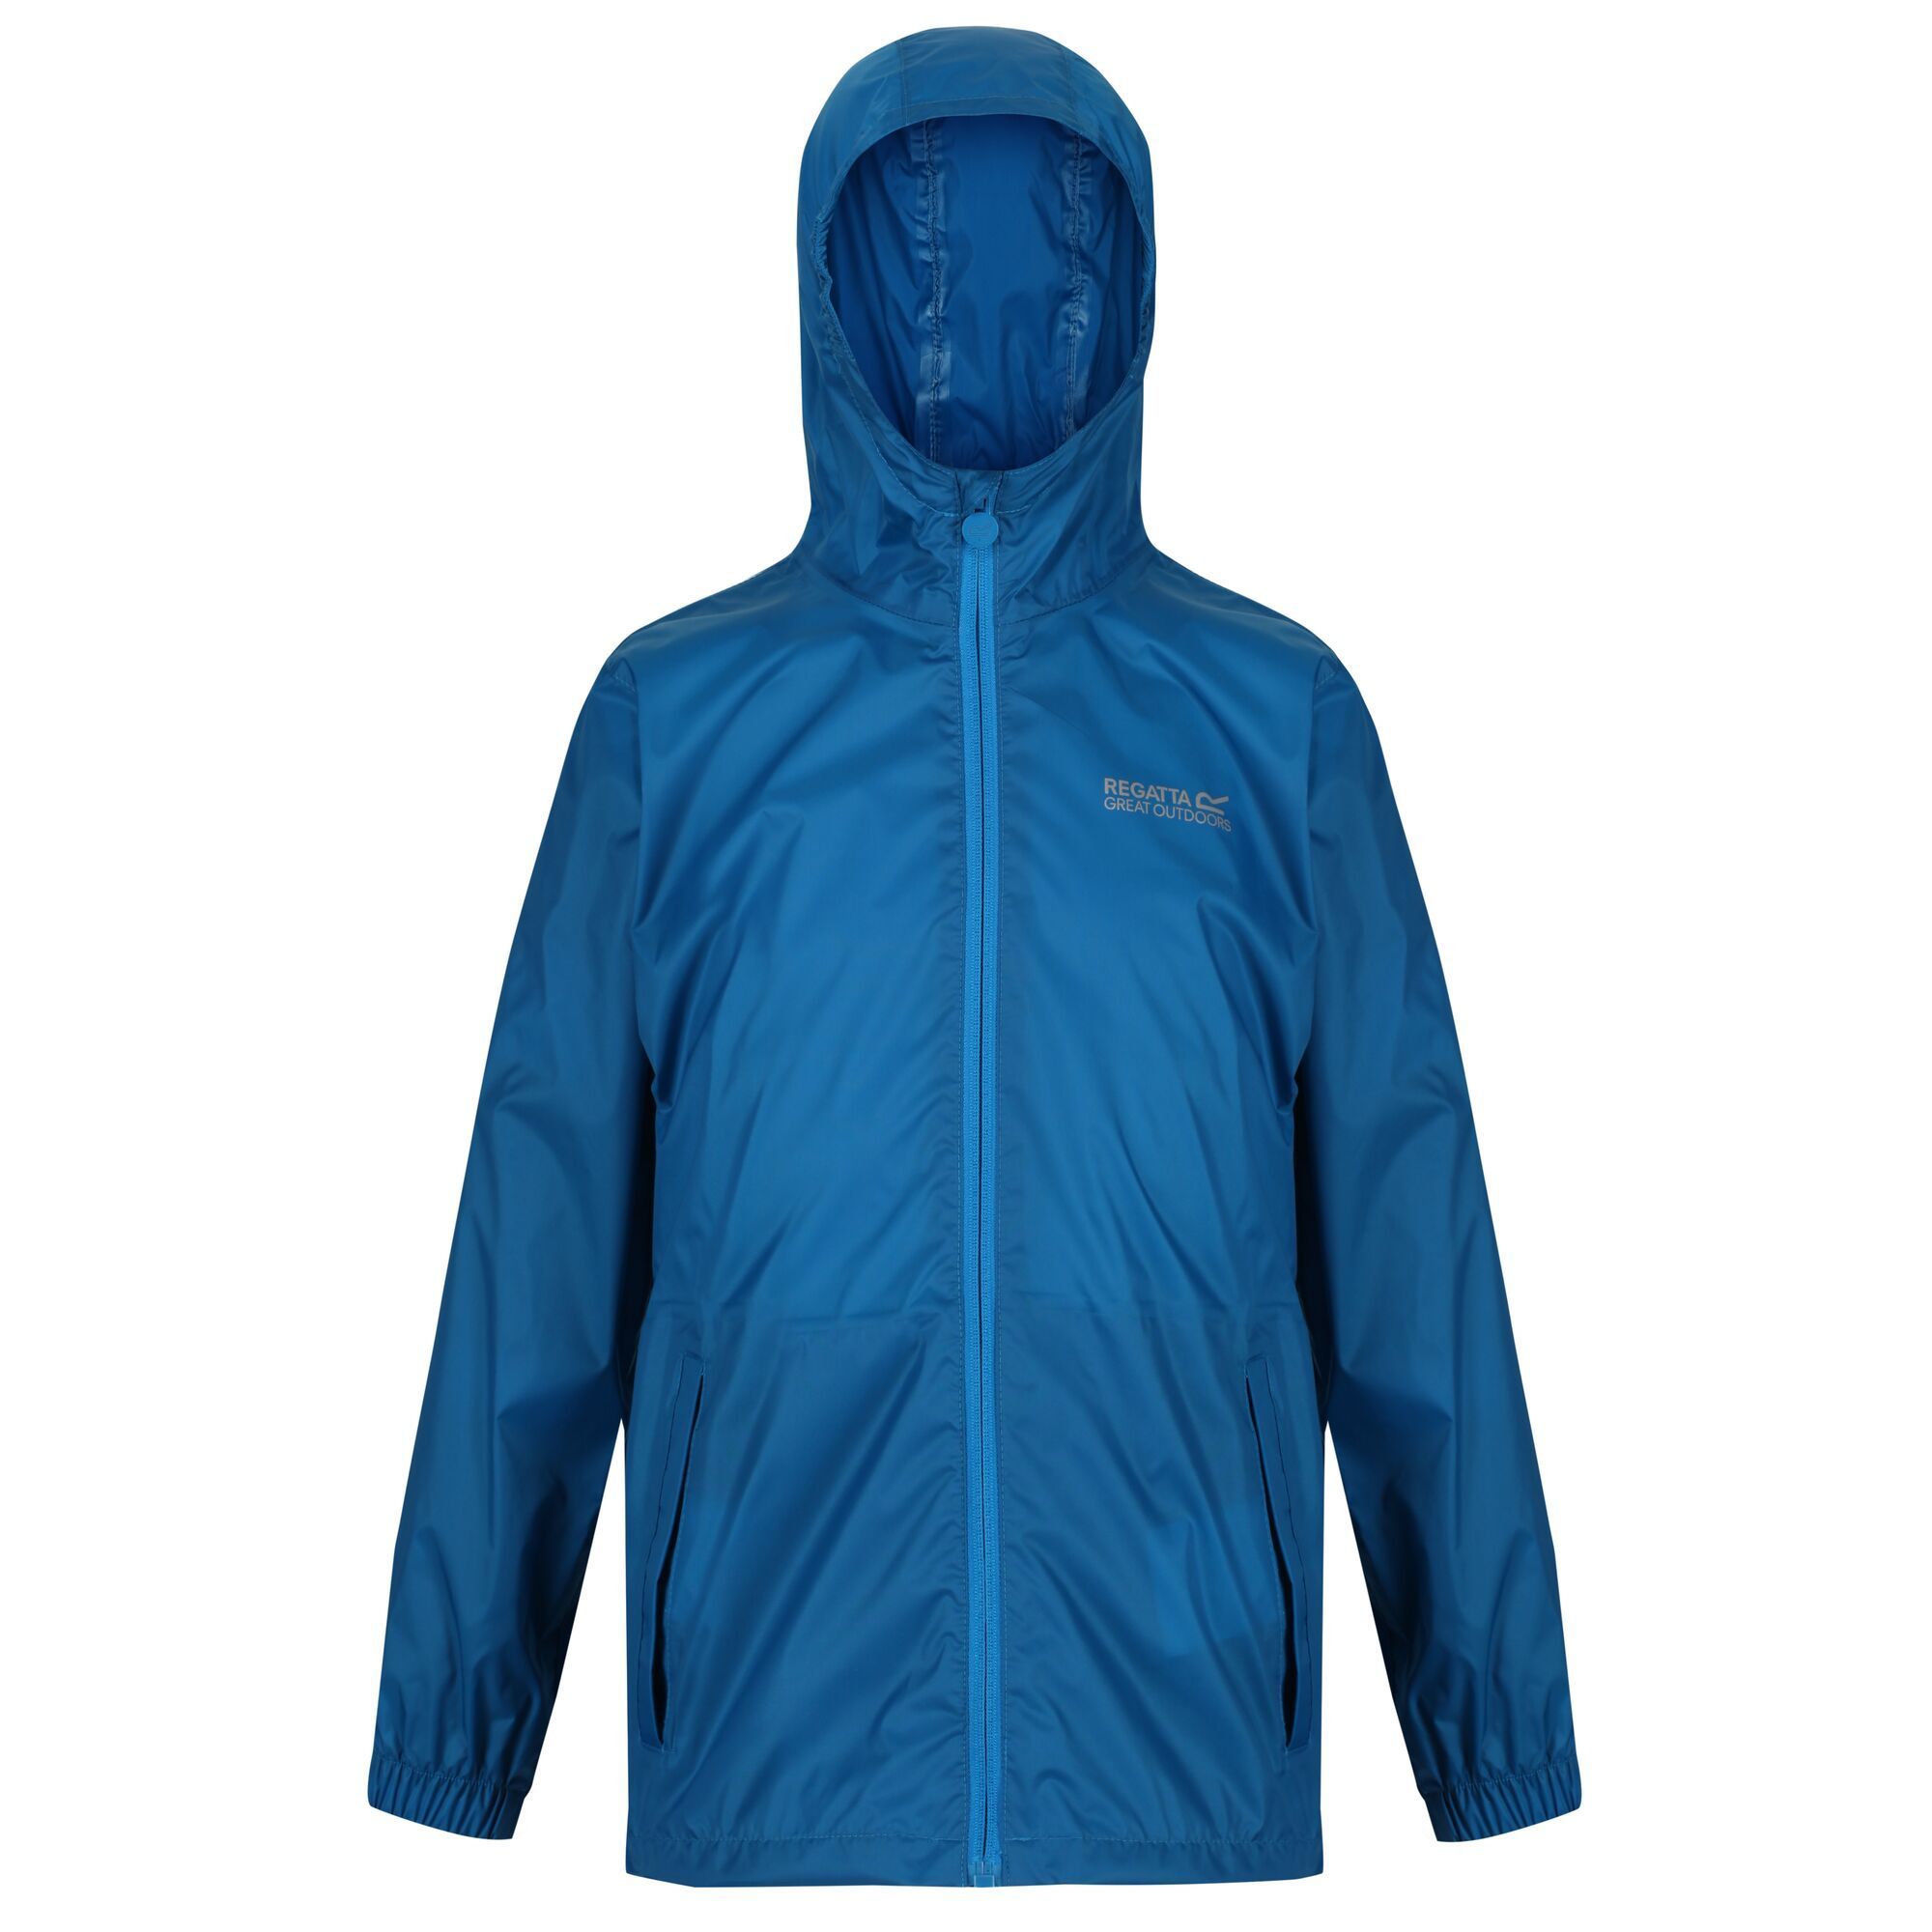 100% polyamide. Lightweight, waterproof jacket that packs down small, ideal for walking, hiking, camping, festivals and school trips. The seam sealed ISOLITE 5,000 polyamide fabric with a DWR (Durable Water Repellent) finish sheds moisture and breathes. With two handy pockets and a small stuff sack. Regatta Kids Sizing (chest approx): 2 Years (53-55cm), 3-4 Years (55-57cm), 5-6 Years (59-61cm), 7-8 Years (63-67cm), 9-10 Years (69-73cm), 11-12 Years (75-79cm), 32